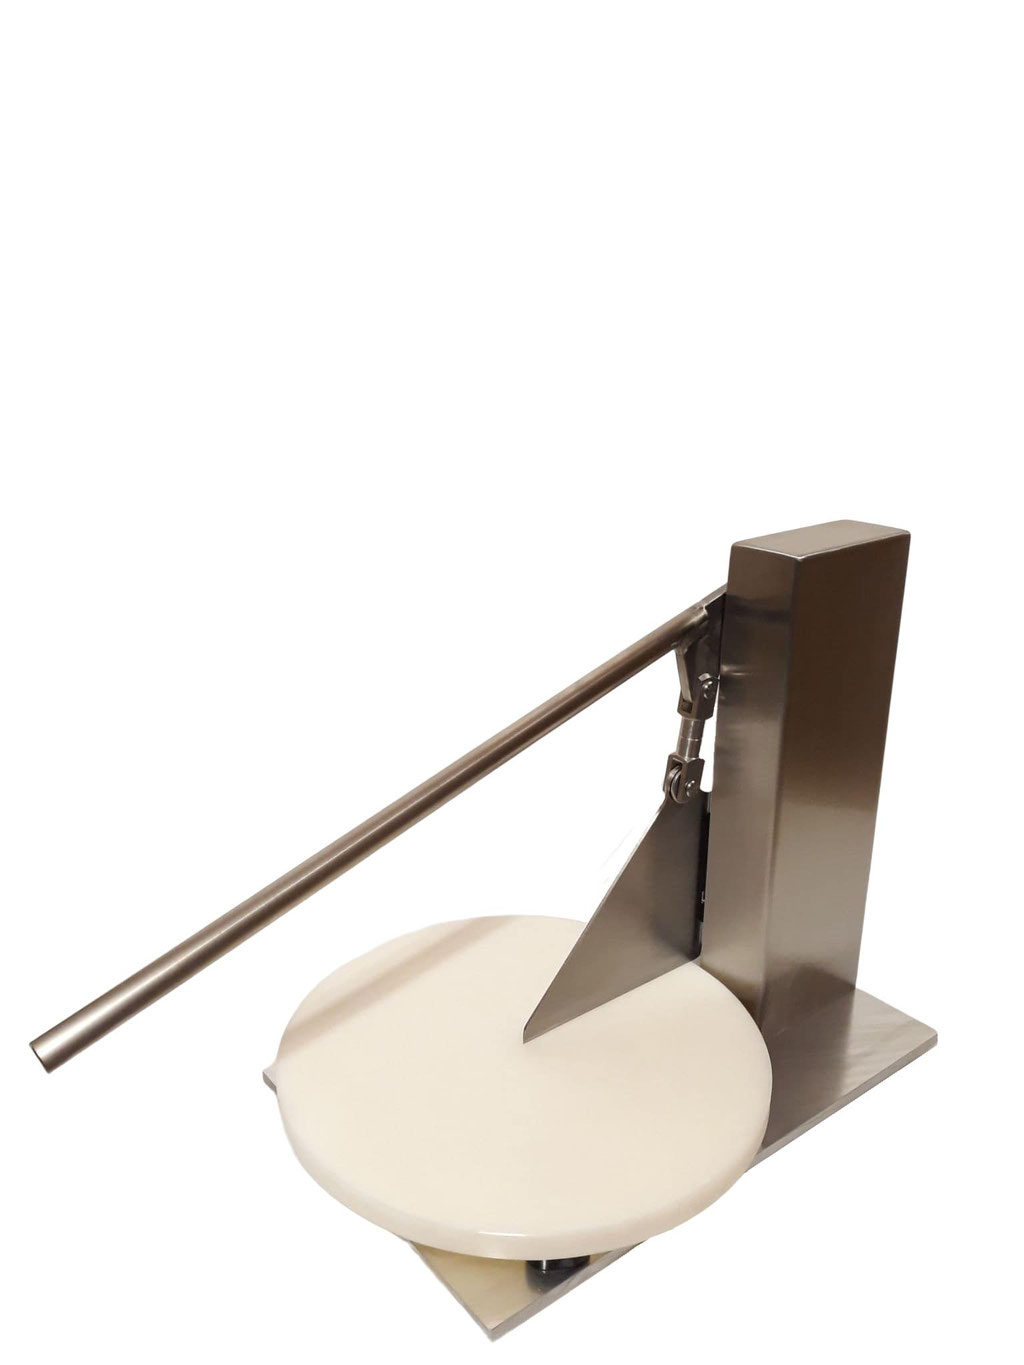 cheese cutter for market stalls or sales premises